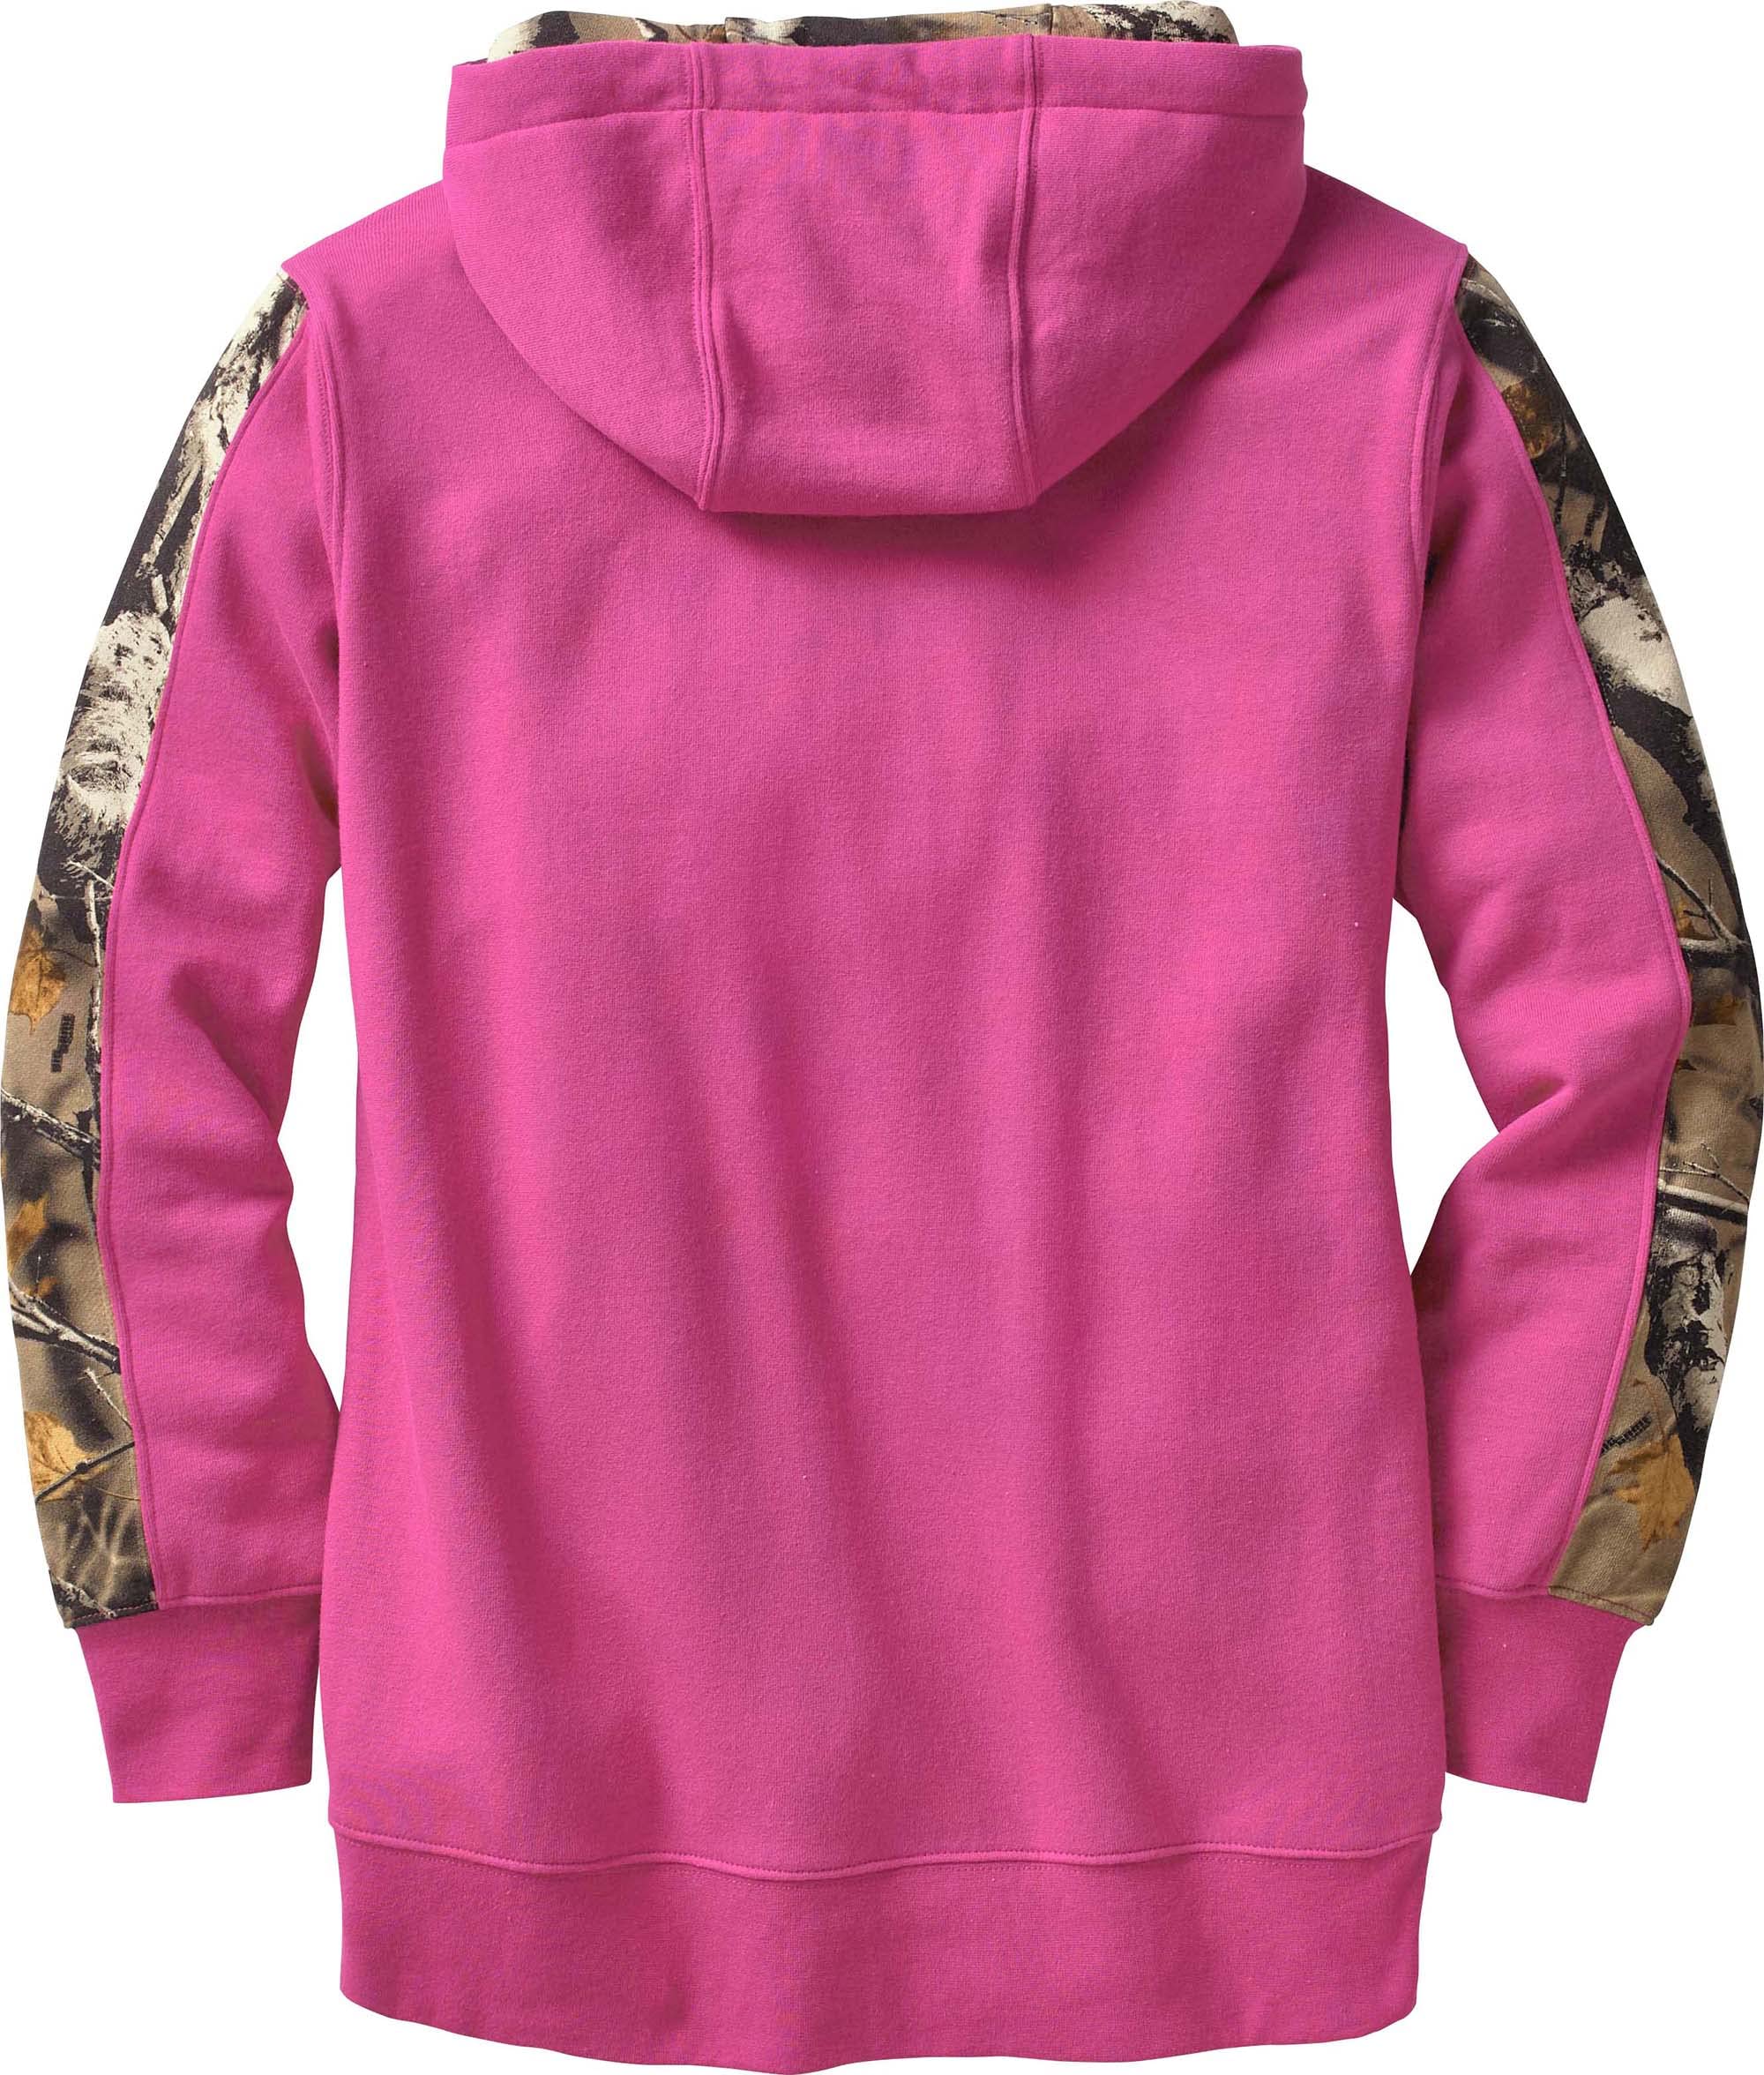 Legendary Whitetails Women's Outfitter Hoodie